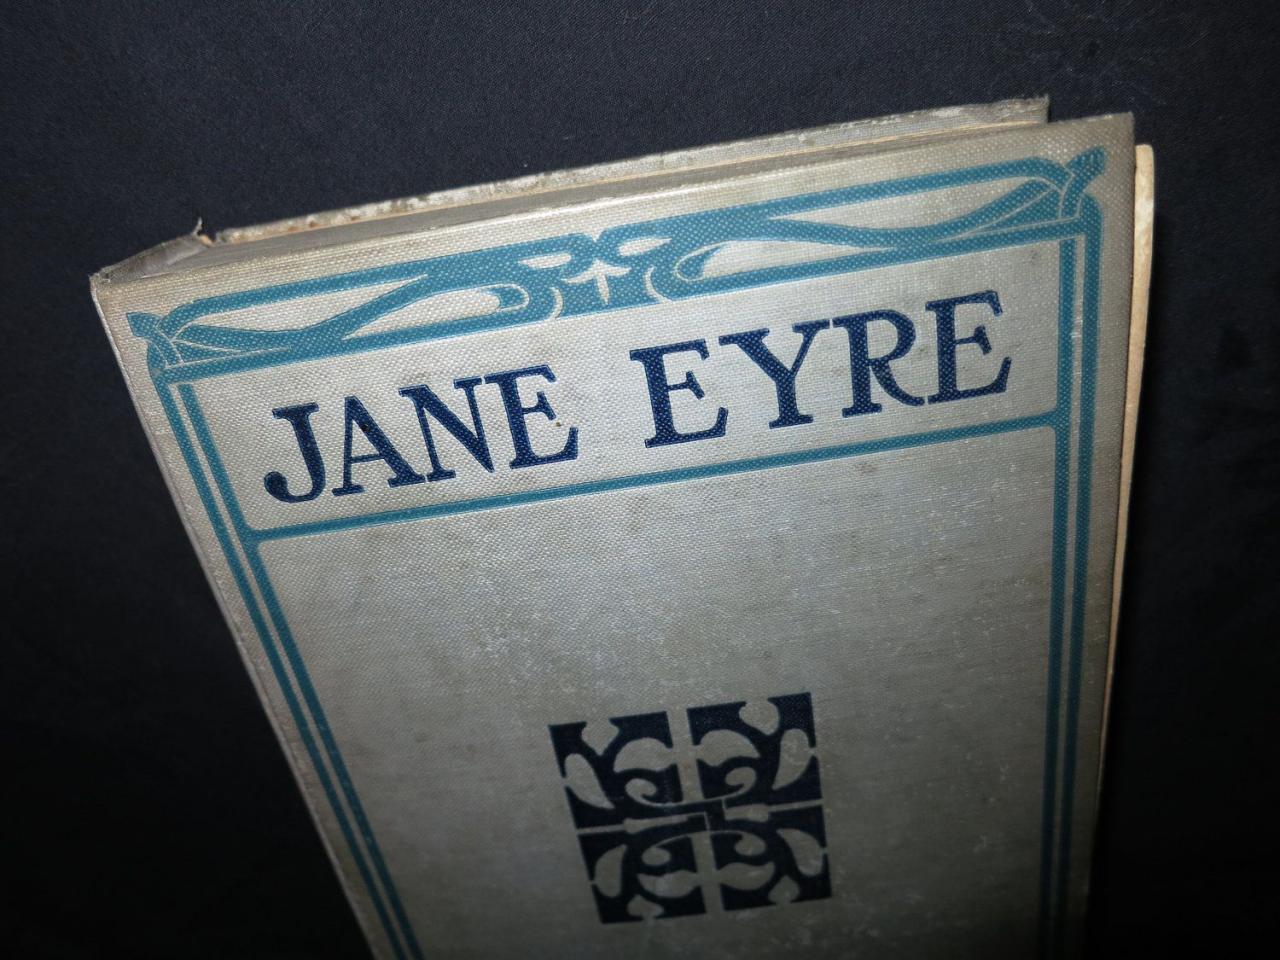 Early Jane Eyre Book Etsy Jane eyre book, Jane eyre, Books